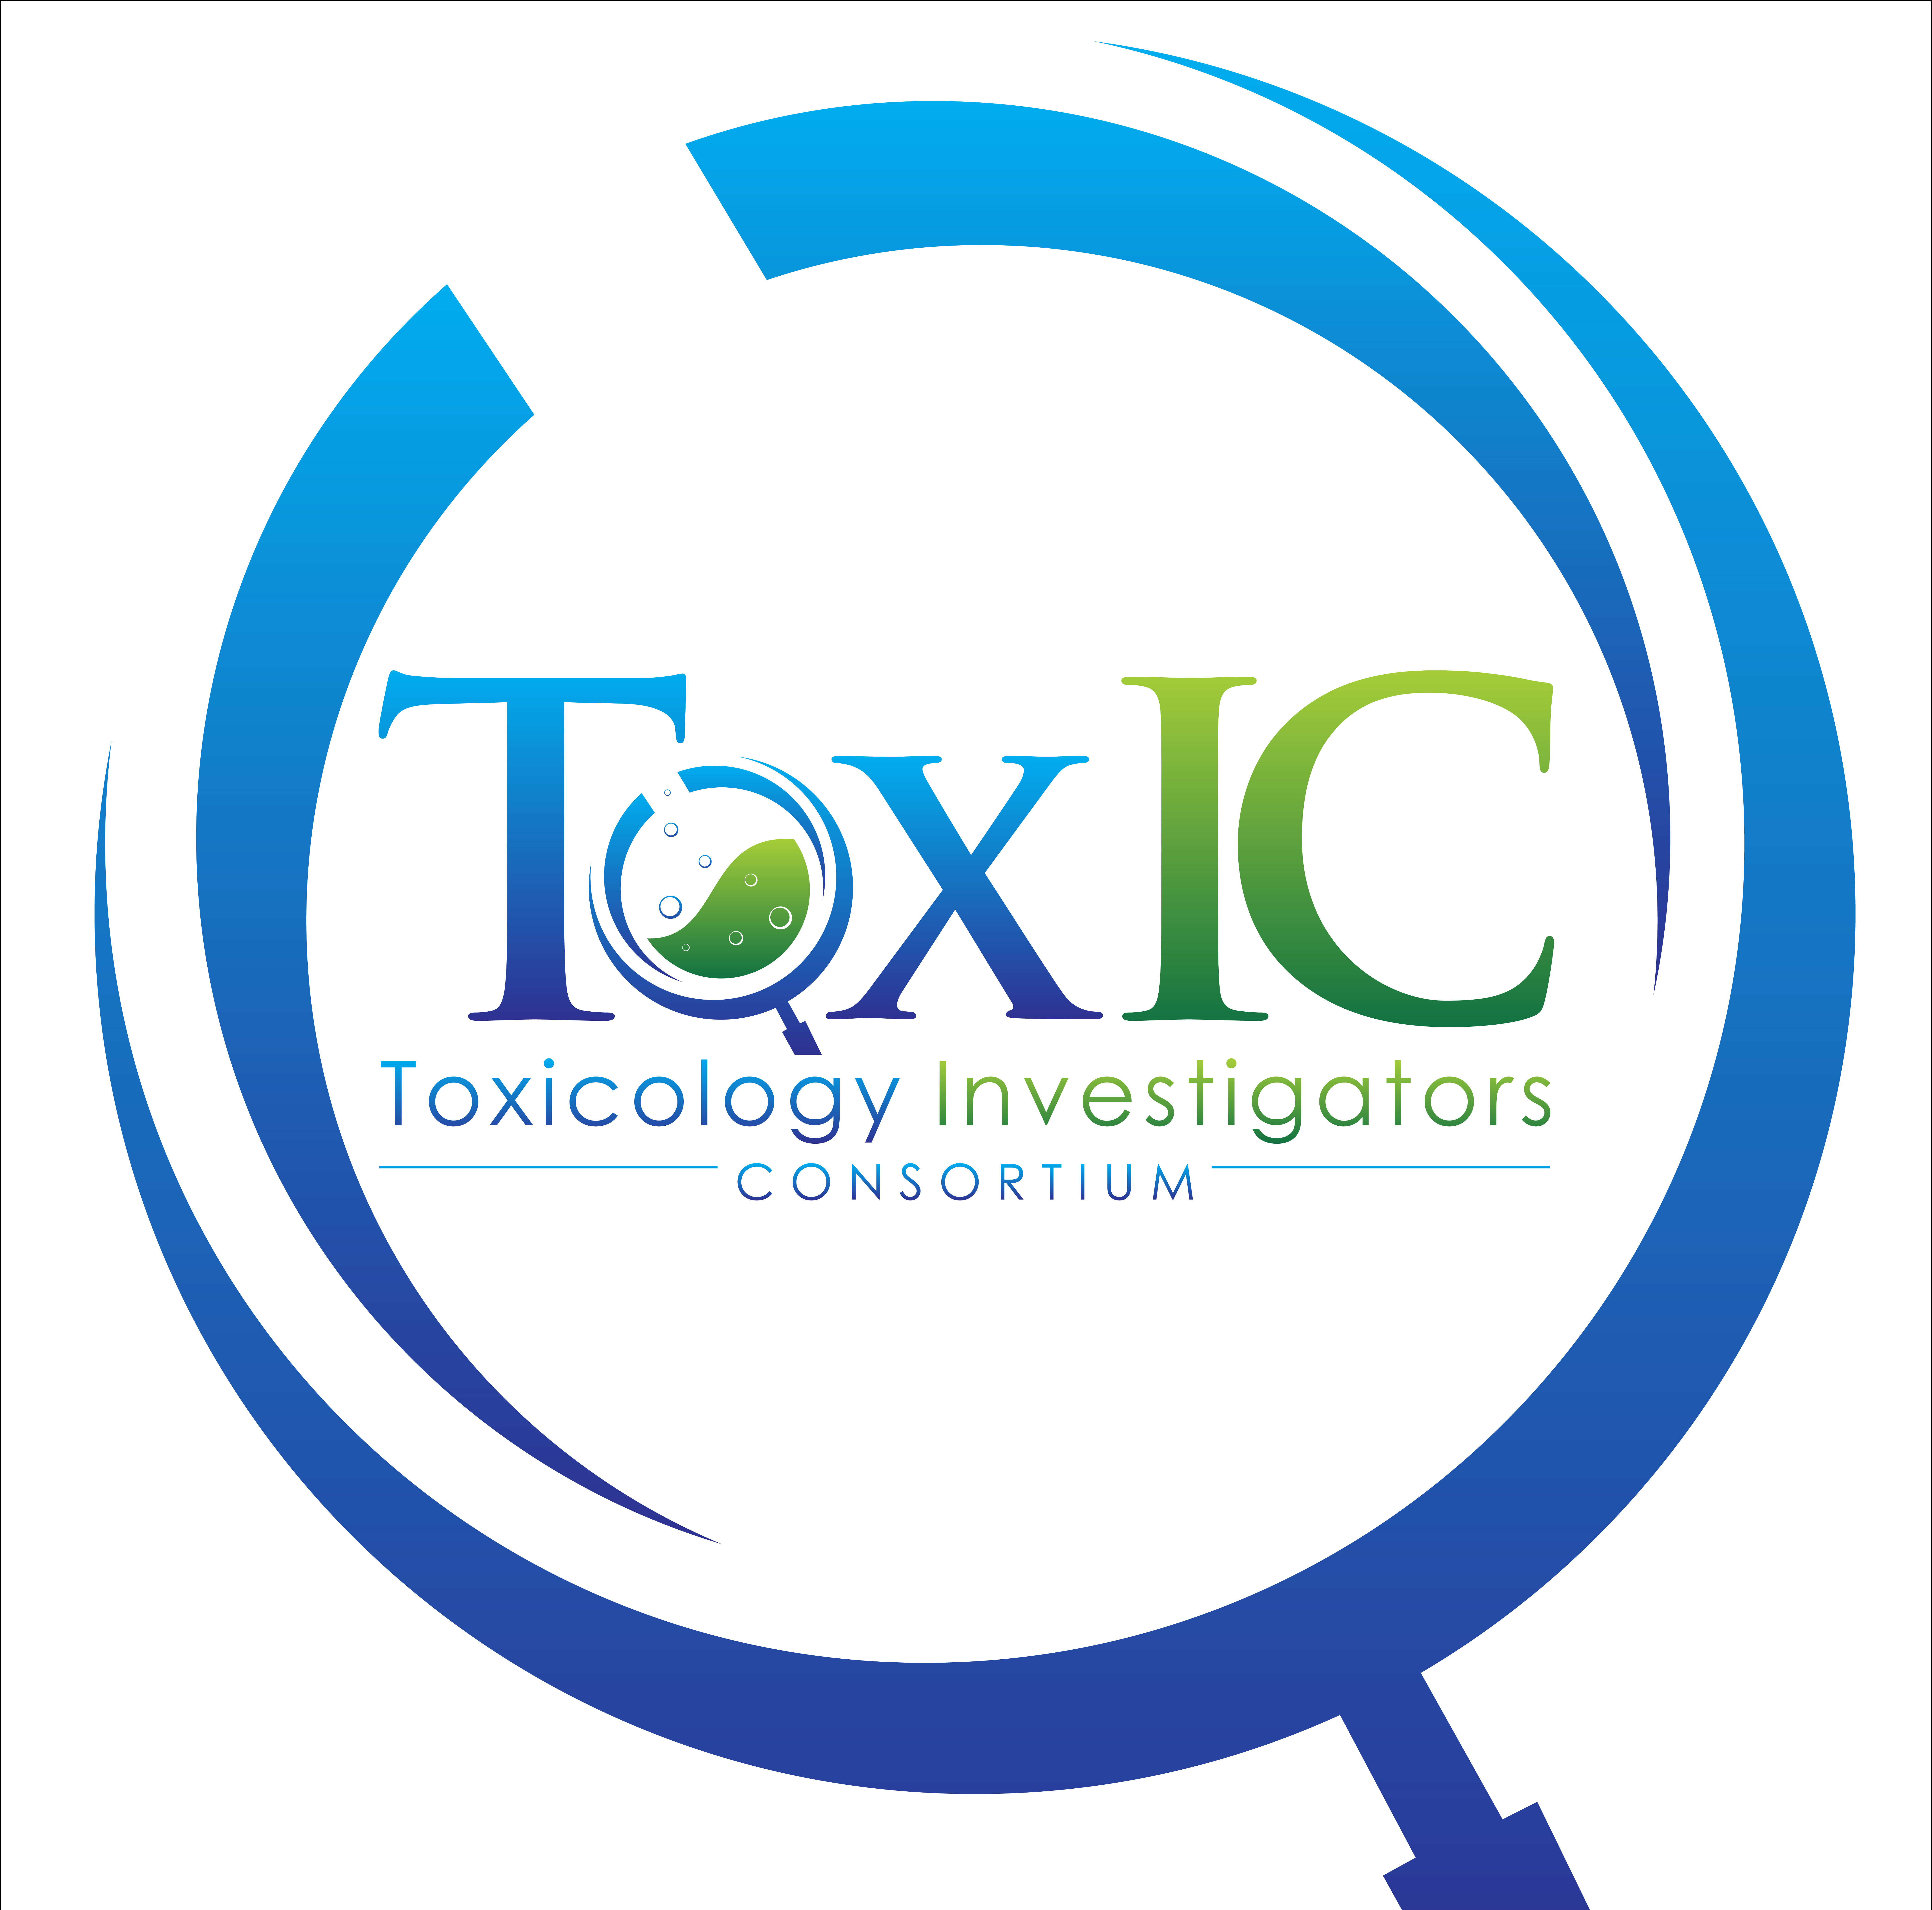 The Toxicology Investigators Consortium (ToxIC) is a multicenter toxico-surveillance and research network comprised of physicians specifically qualified in the field of medical toxicology. ToxIC functions under the auspices of the American College of Medical Toxicology (ACMT), the professional society of physicians specializing in that discipline.